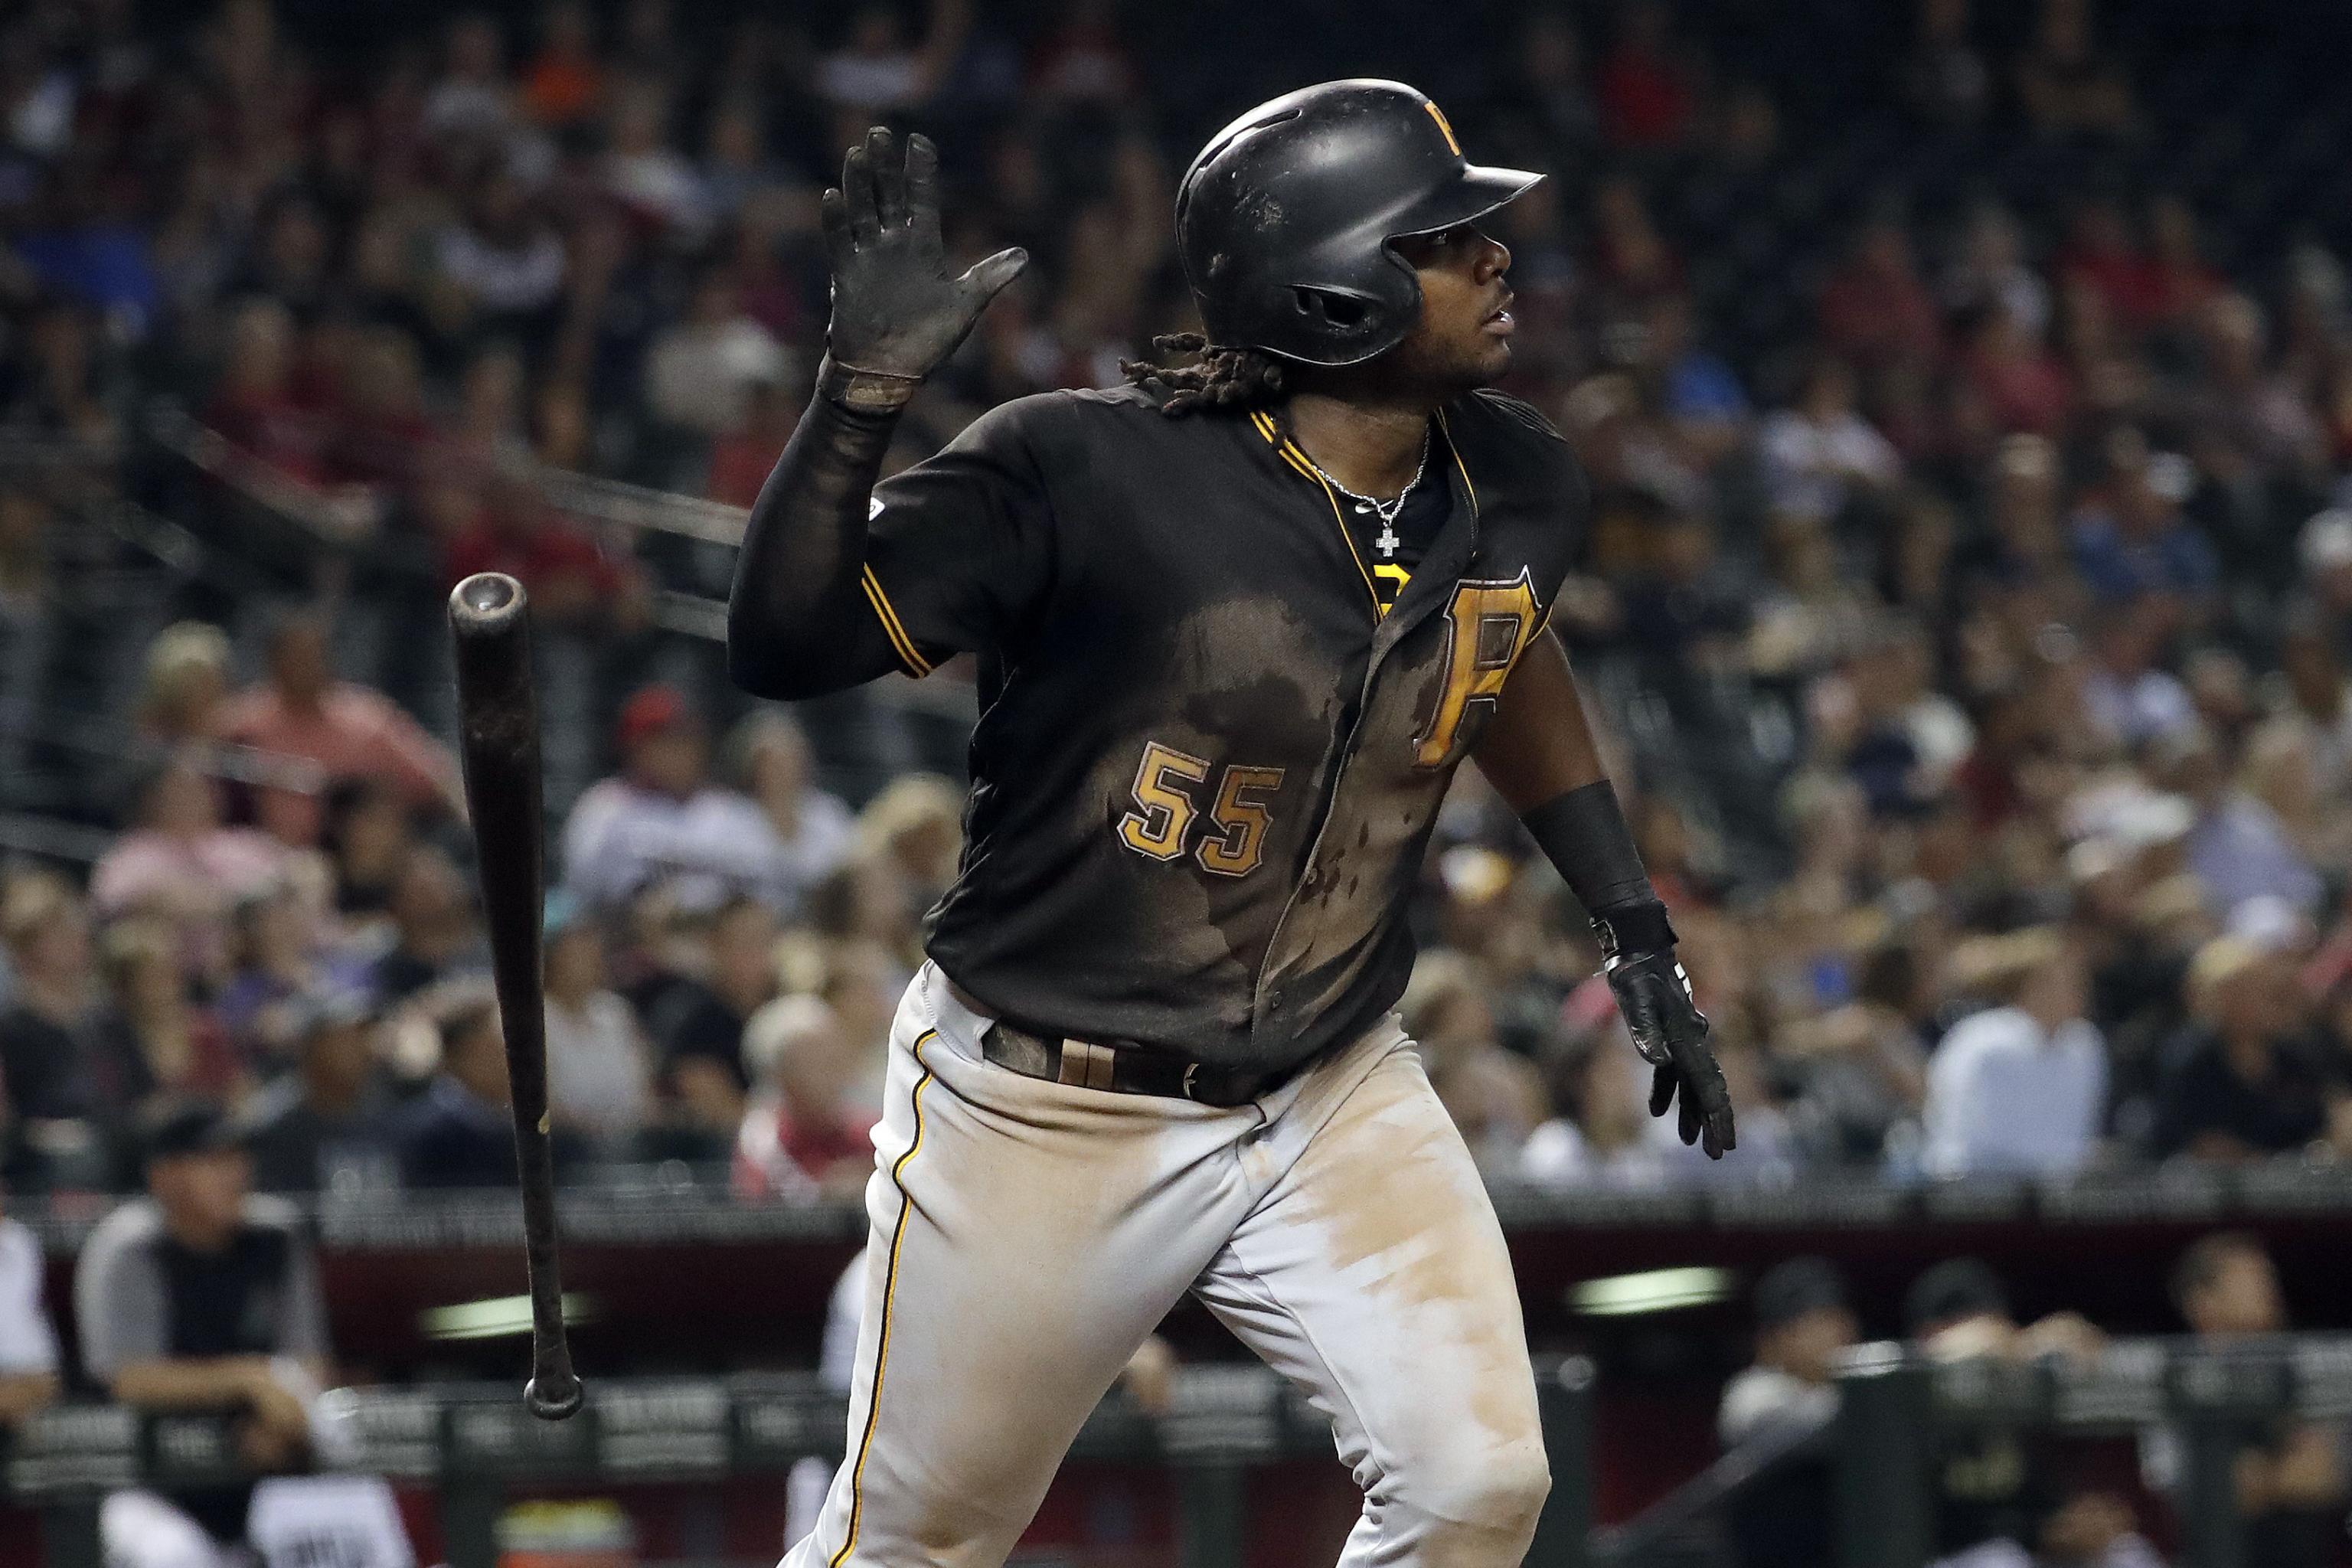 Josh Bell's Batted Ball Tendencies Have Taken A Downward Turn - Diamond  Digest